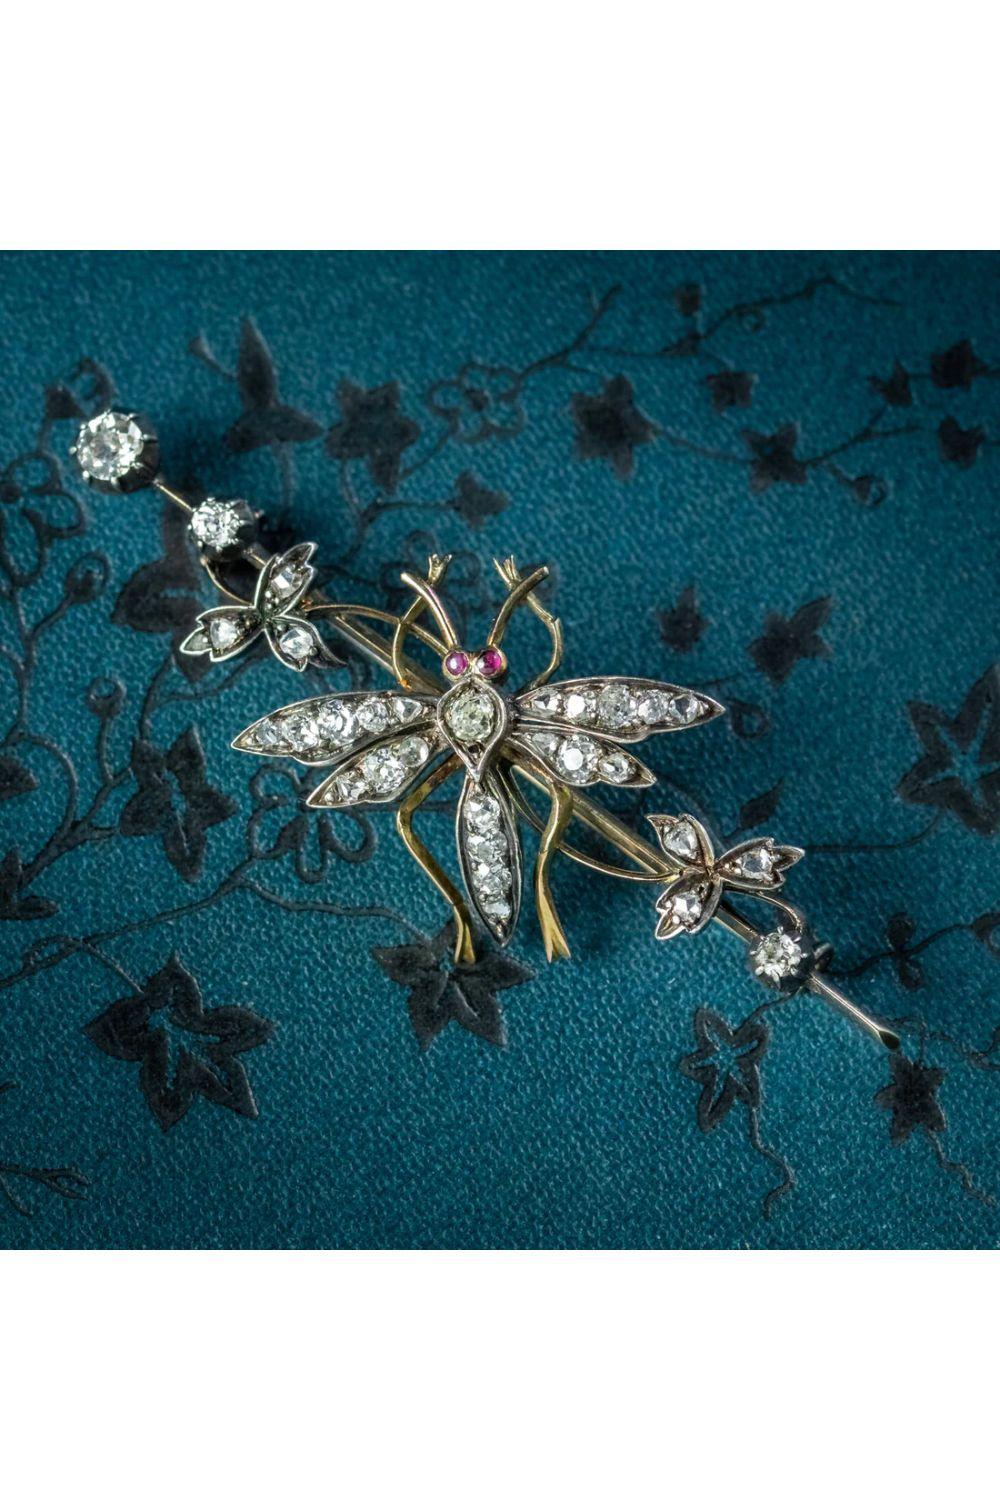 Antique Victorian Diamond Insect Brooch Silver 18 Carat Gold, circa 1900 For Sale 1